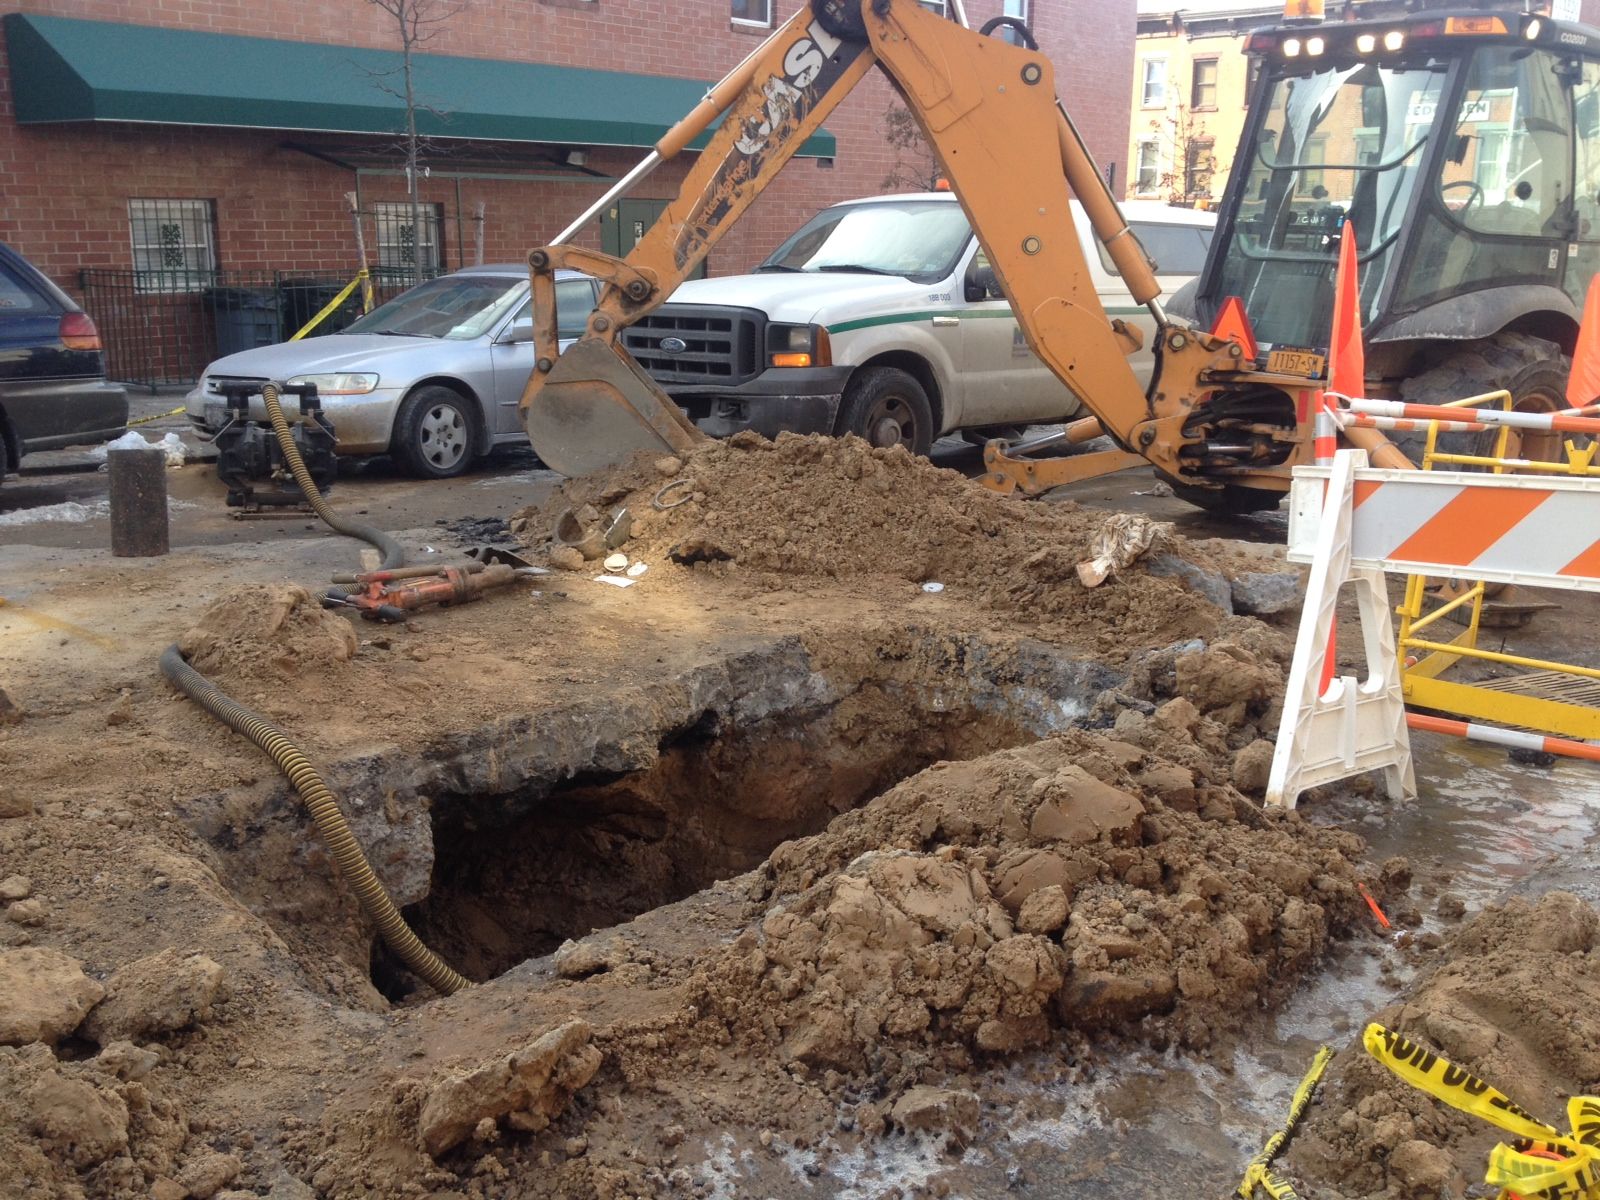 DEP Says Water Is Back On For Residents Of 21st Street